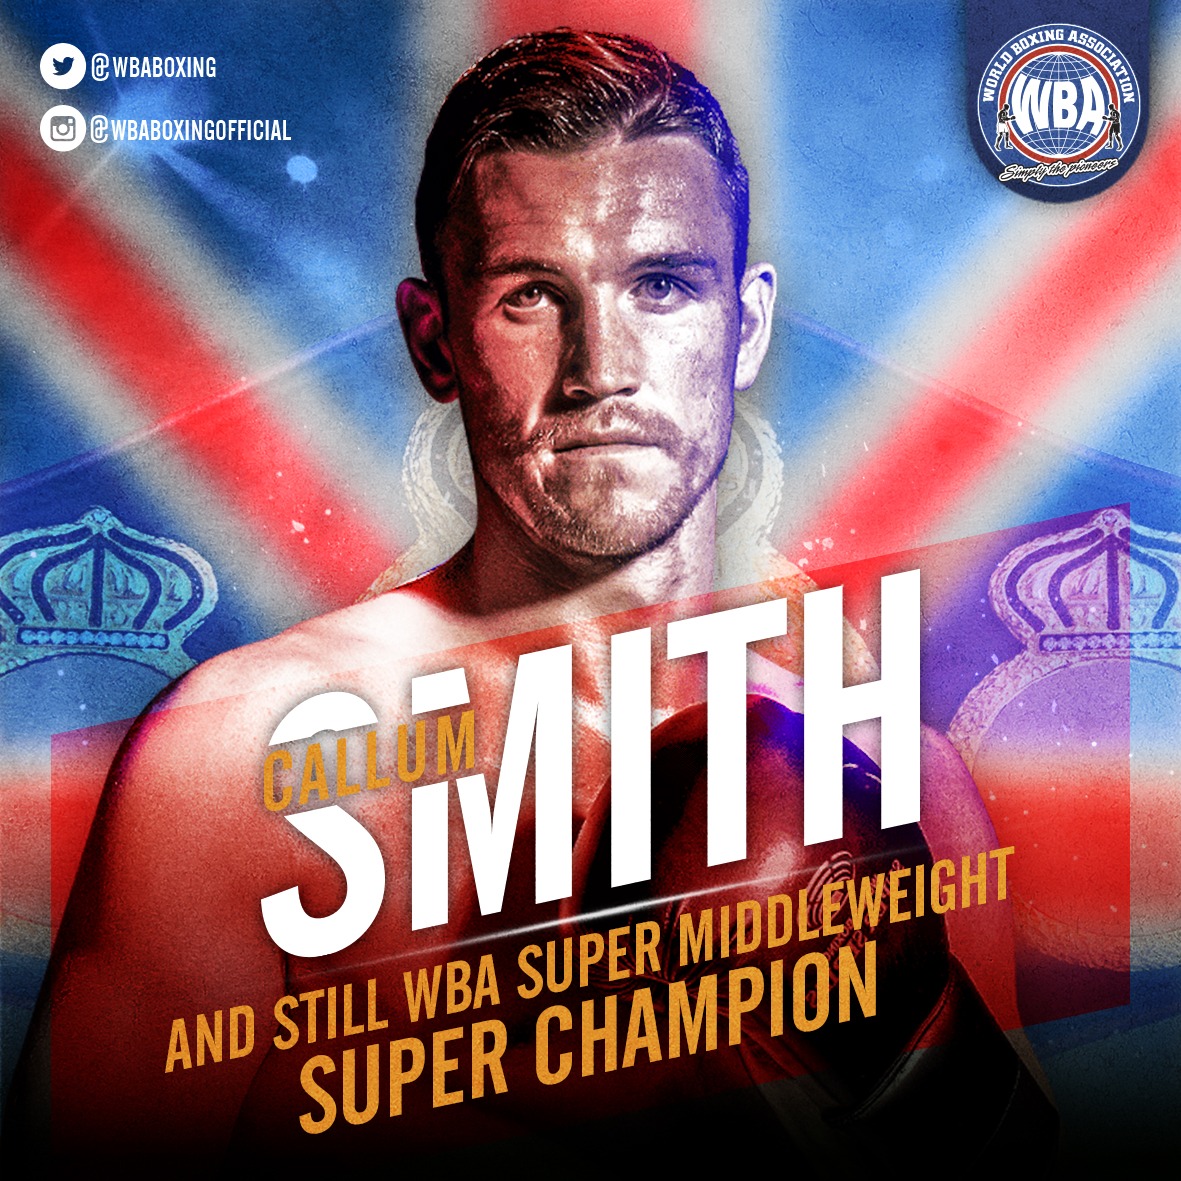 Smith retains his WBA Super Title with decision over Ryder